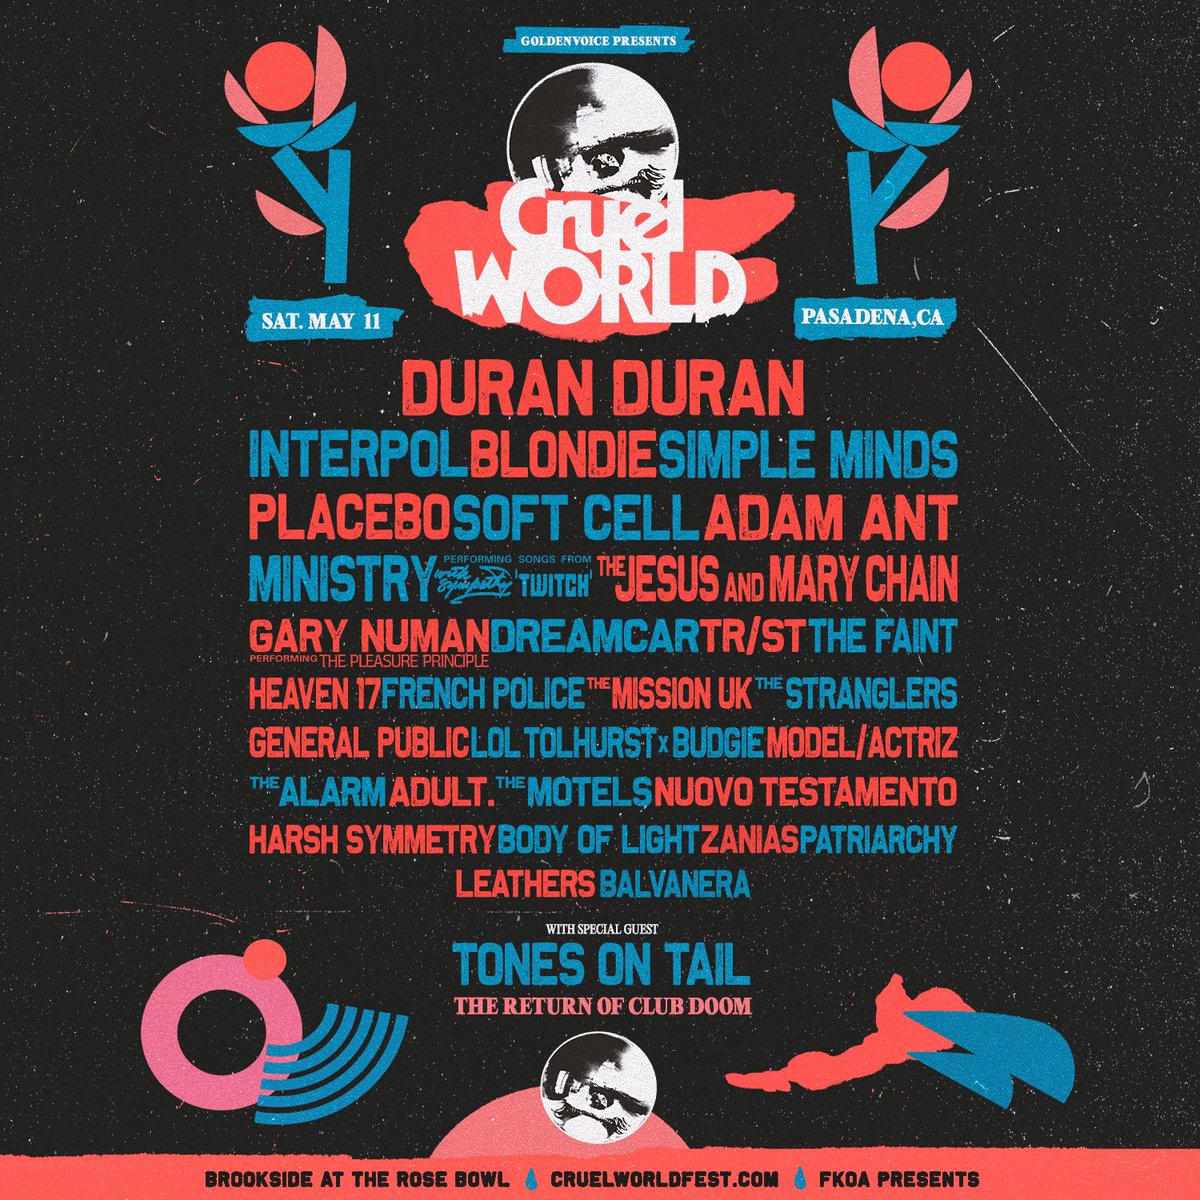 Hello Cruel World! Duran Duran will see you May 11, 2024 at Brookside at the Rose Bowl. Register now for access to passes starting Fri, December 8 at noon PT at cruelworldfest.com. 

#duranlive ✨